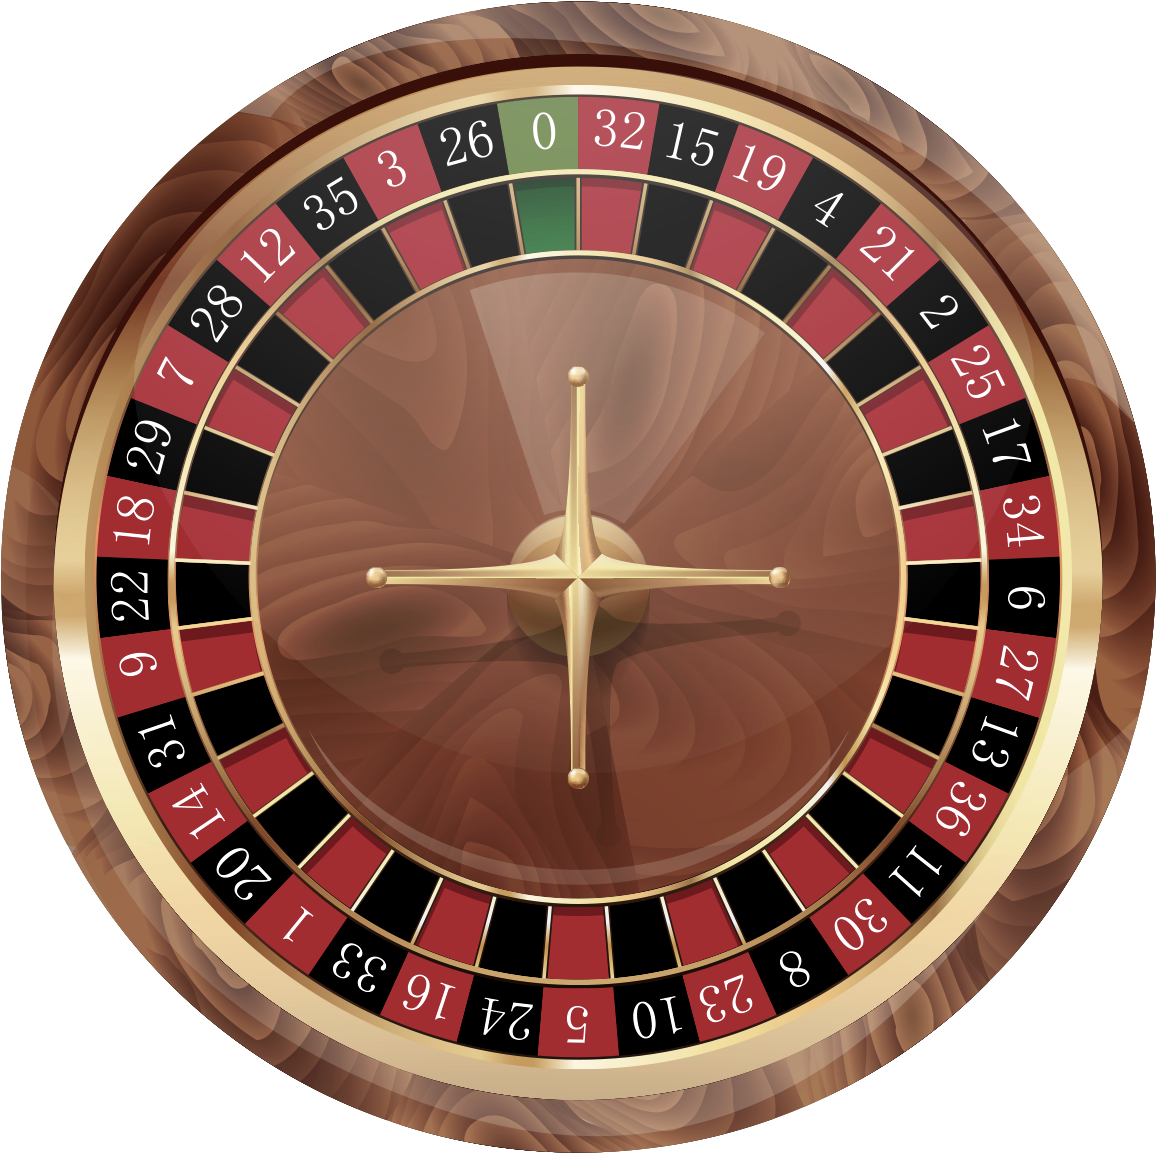 The Return on Investment (ROI) Concept Playing Roulette